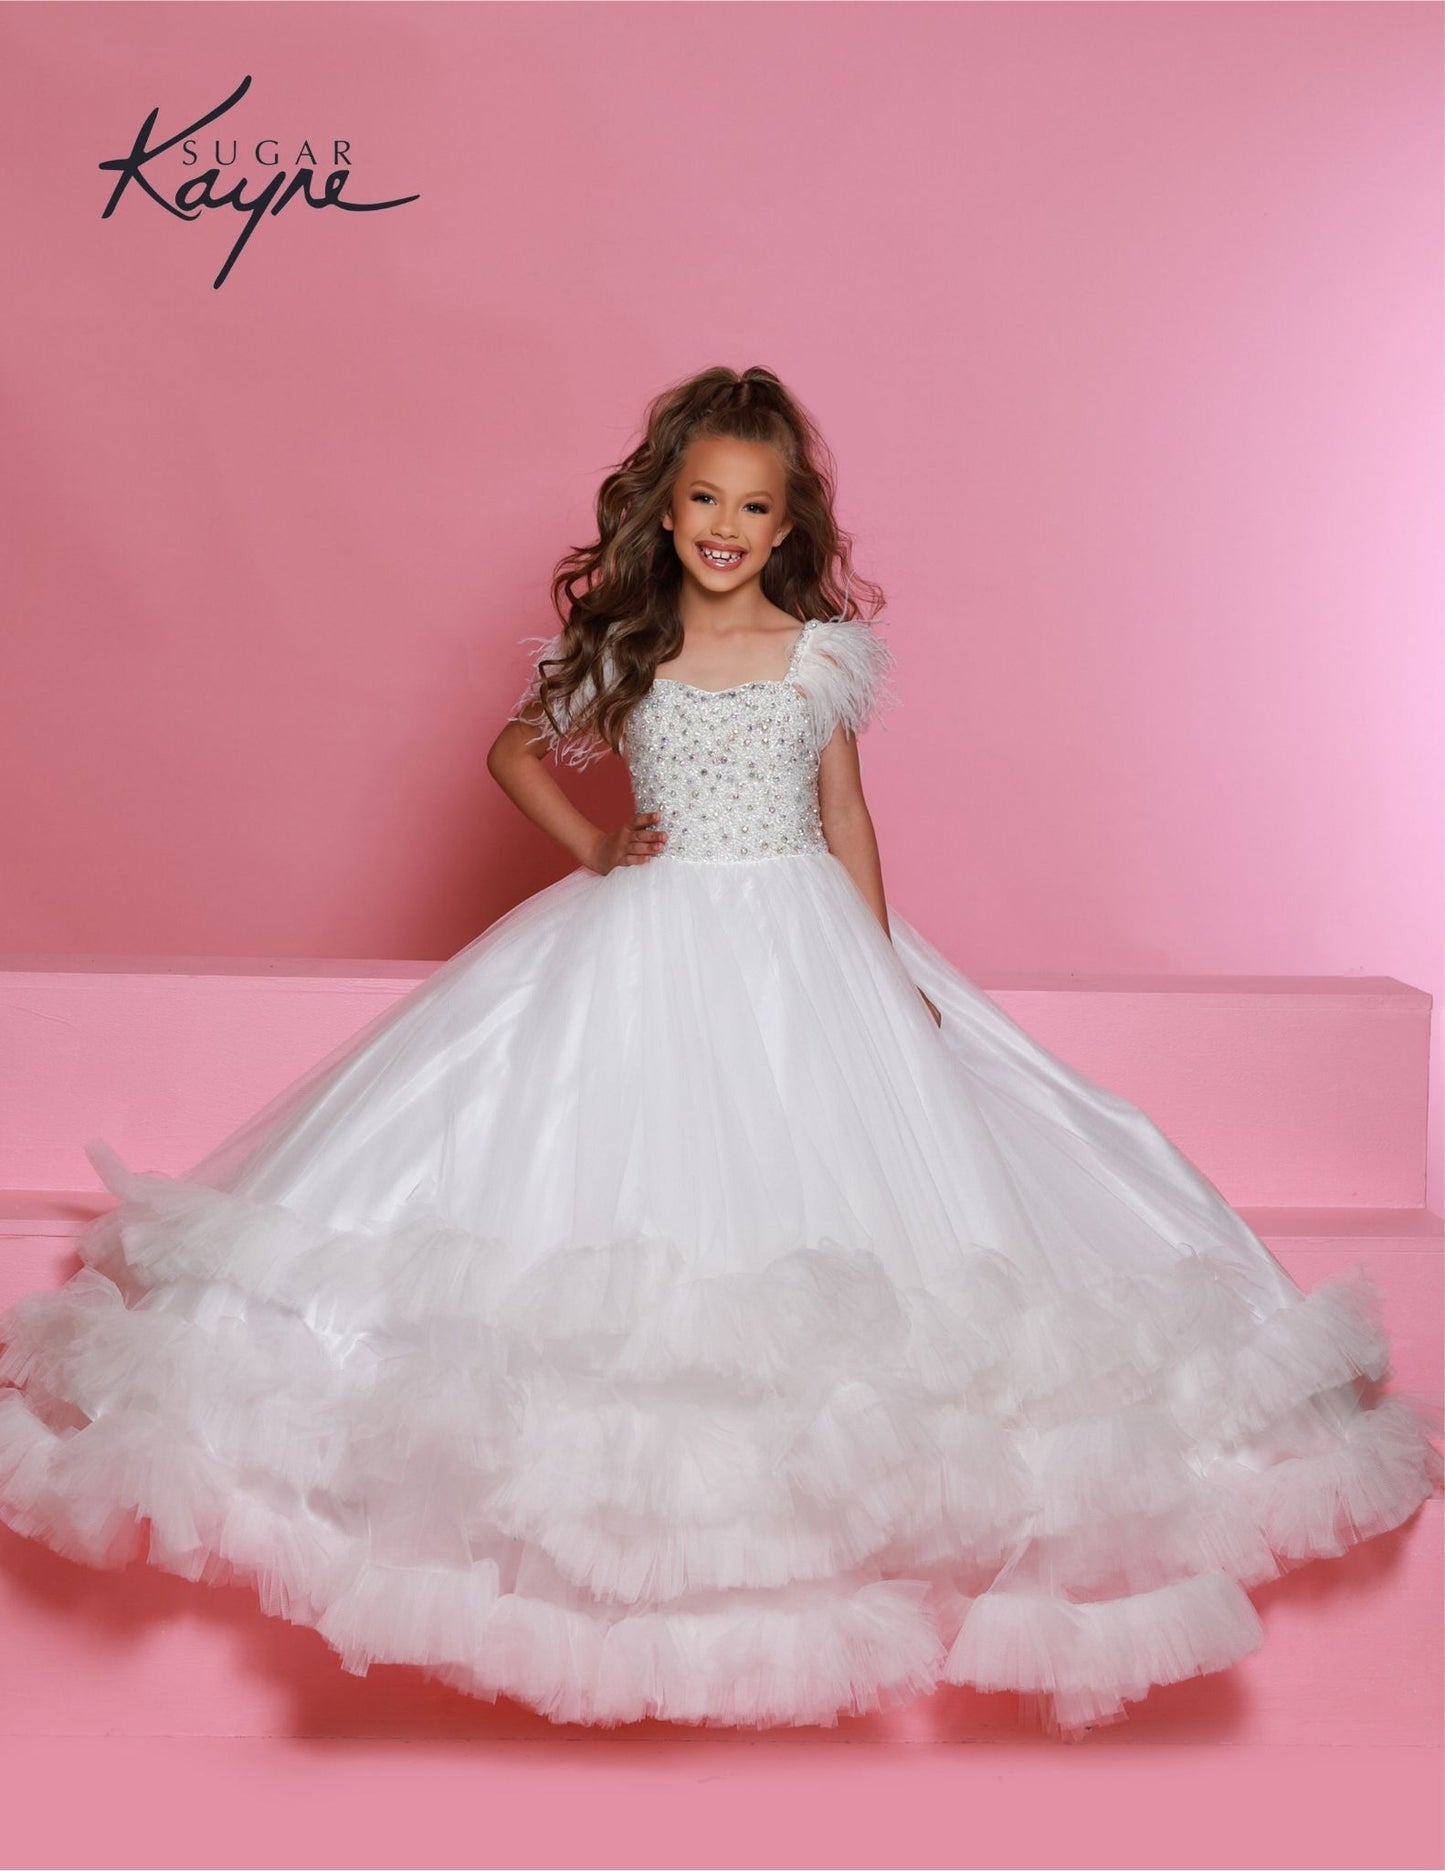 Sugar Kayne C327 features a fashionable white pageant dress for girls and preteens, complete with feather straps, a tiered ruffle bottom, and a crystal stone bodice.